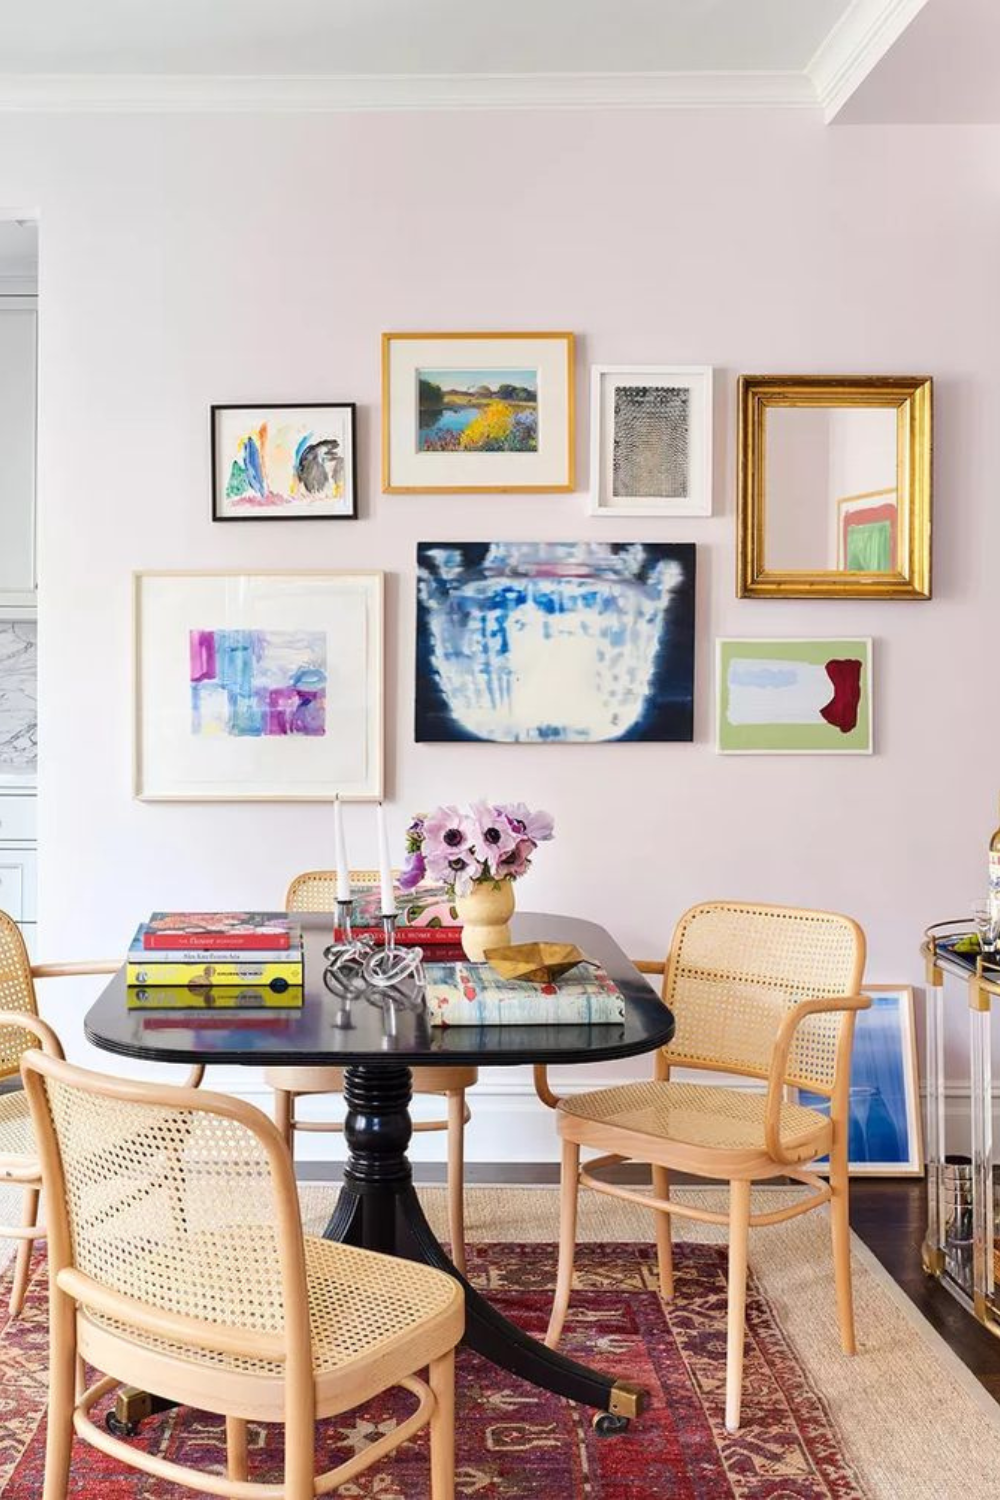 Easy Ways to Make a Dining Area in a Small Space